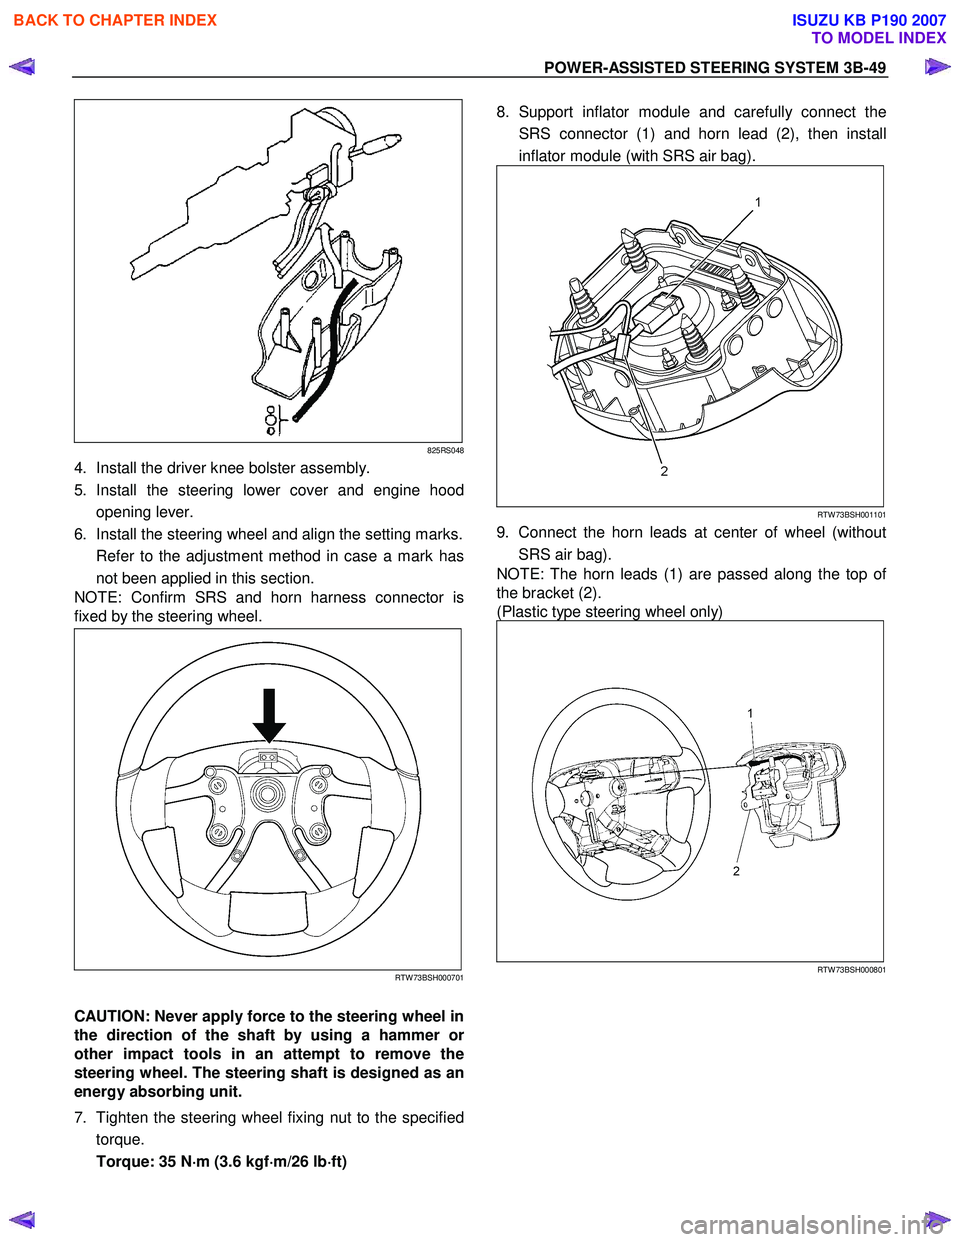 ISUZU KB P190 2007  Workshop Service Manual POWER-ASSISTED STEERING SYSTEM 3B-49 
825RS048
4.  Install the driver knee bolster assembly.  
5. Install the steering lower cover and engine hood opening lever. 
6.  Install the steering wheel and al